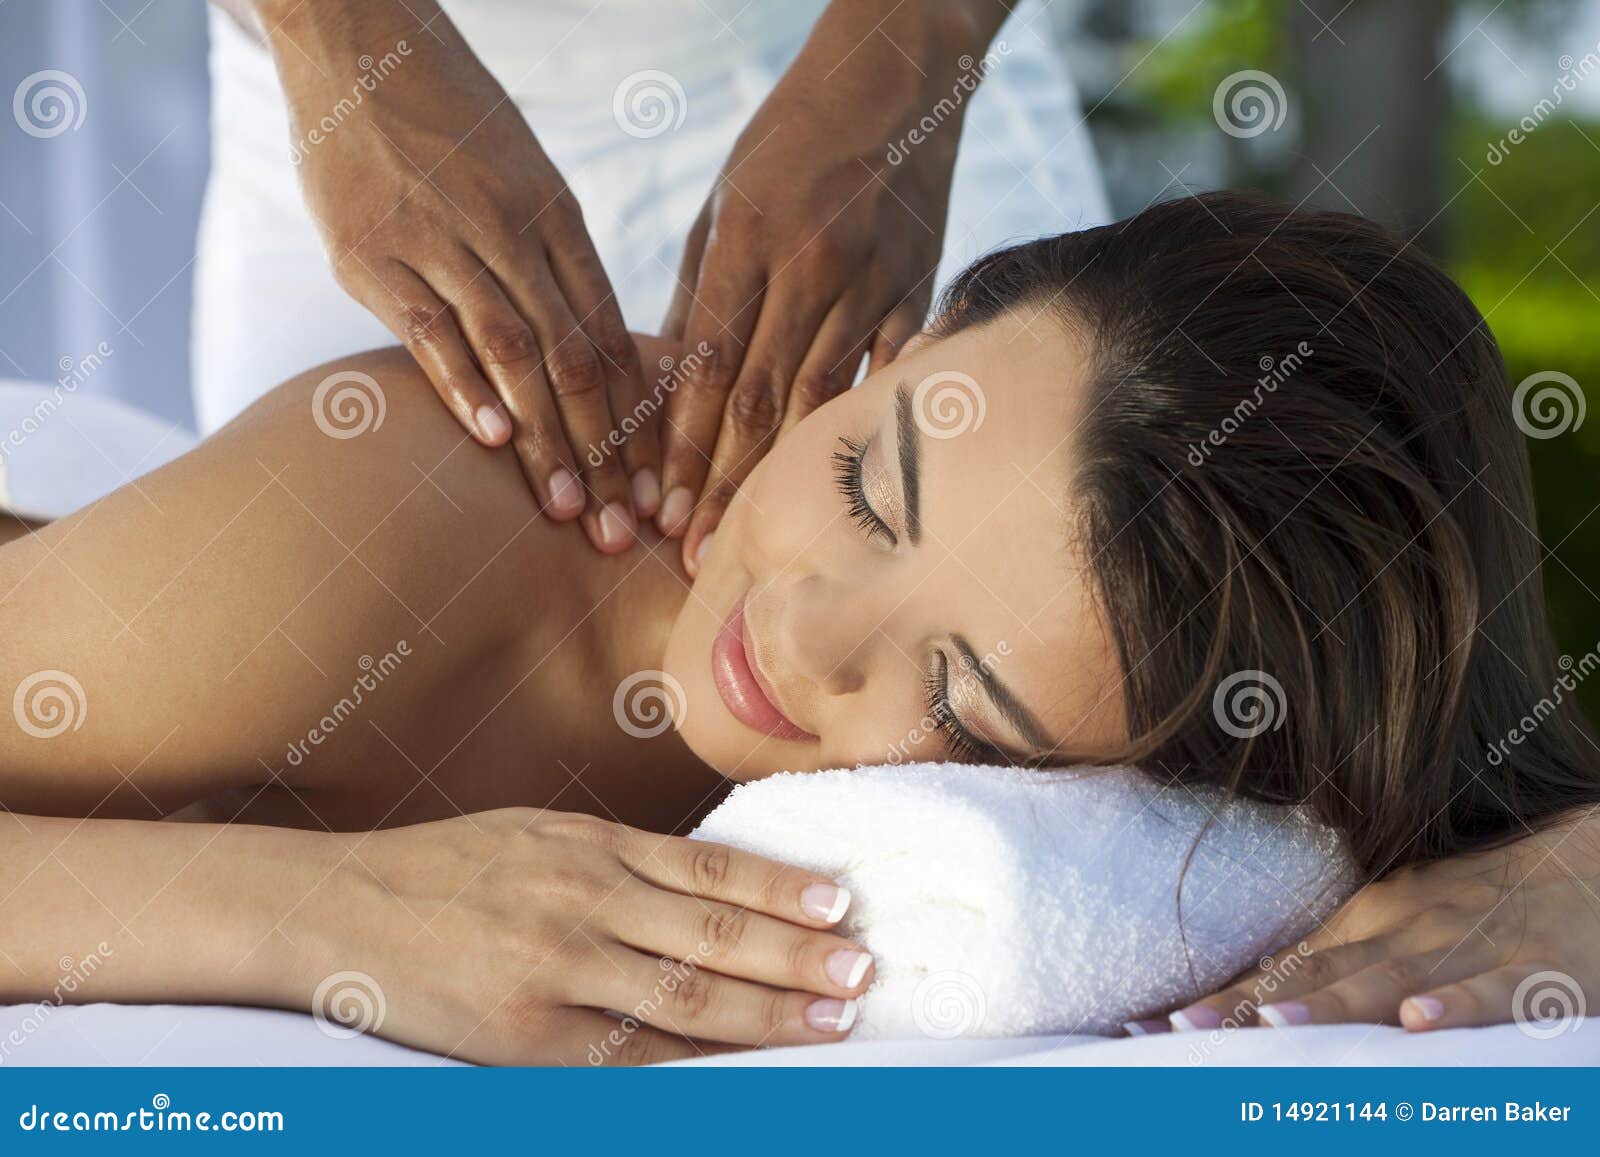 woman at health spa having relaxing massage